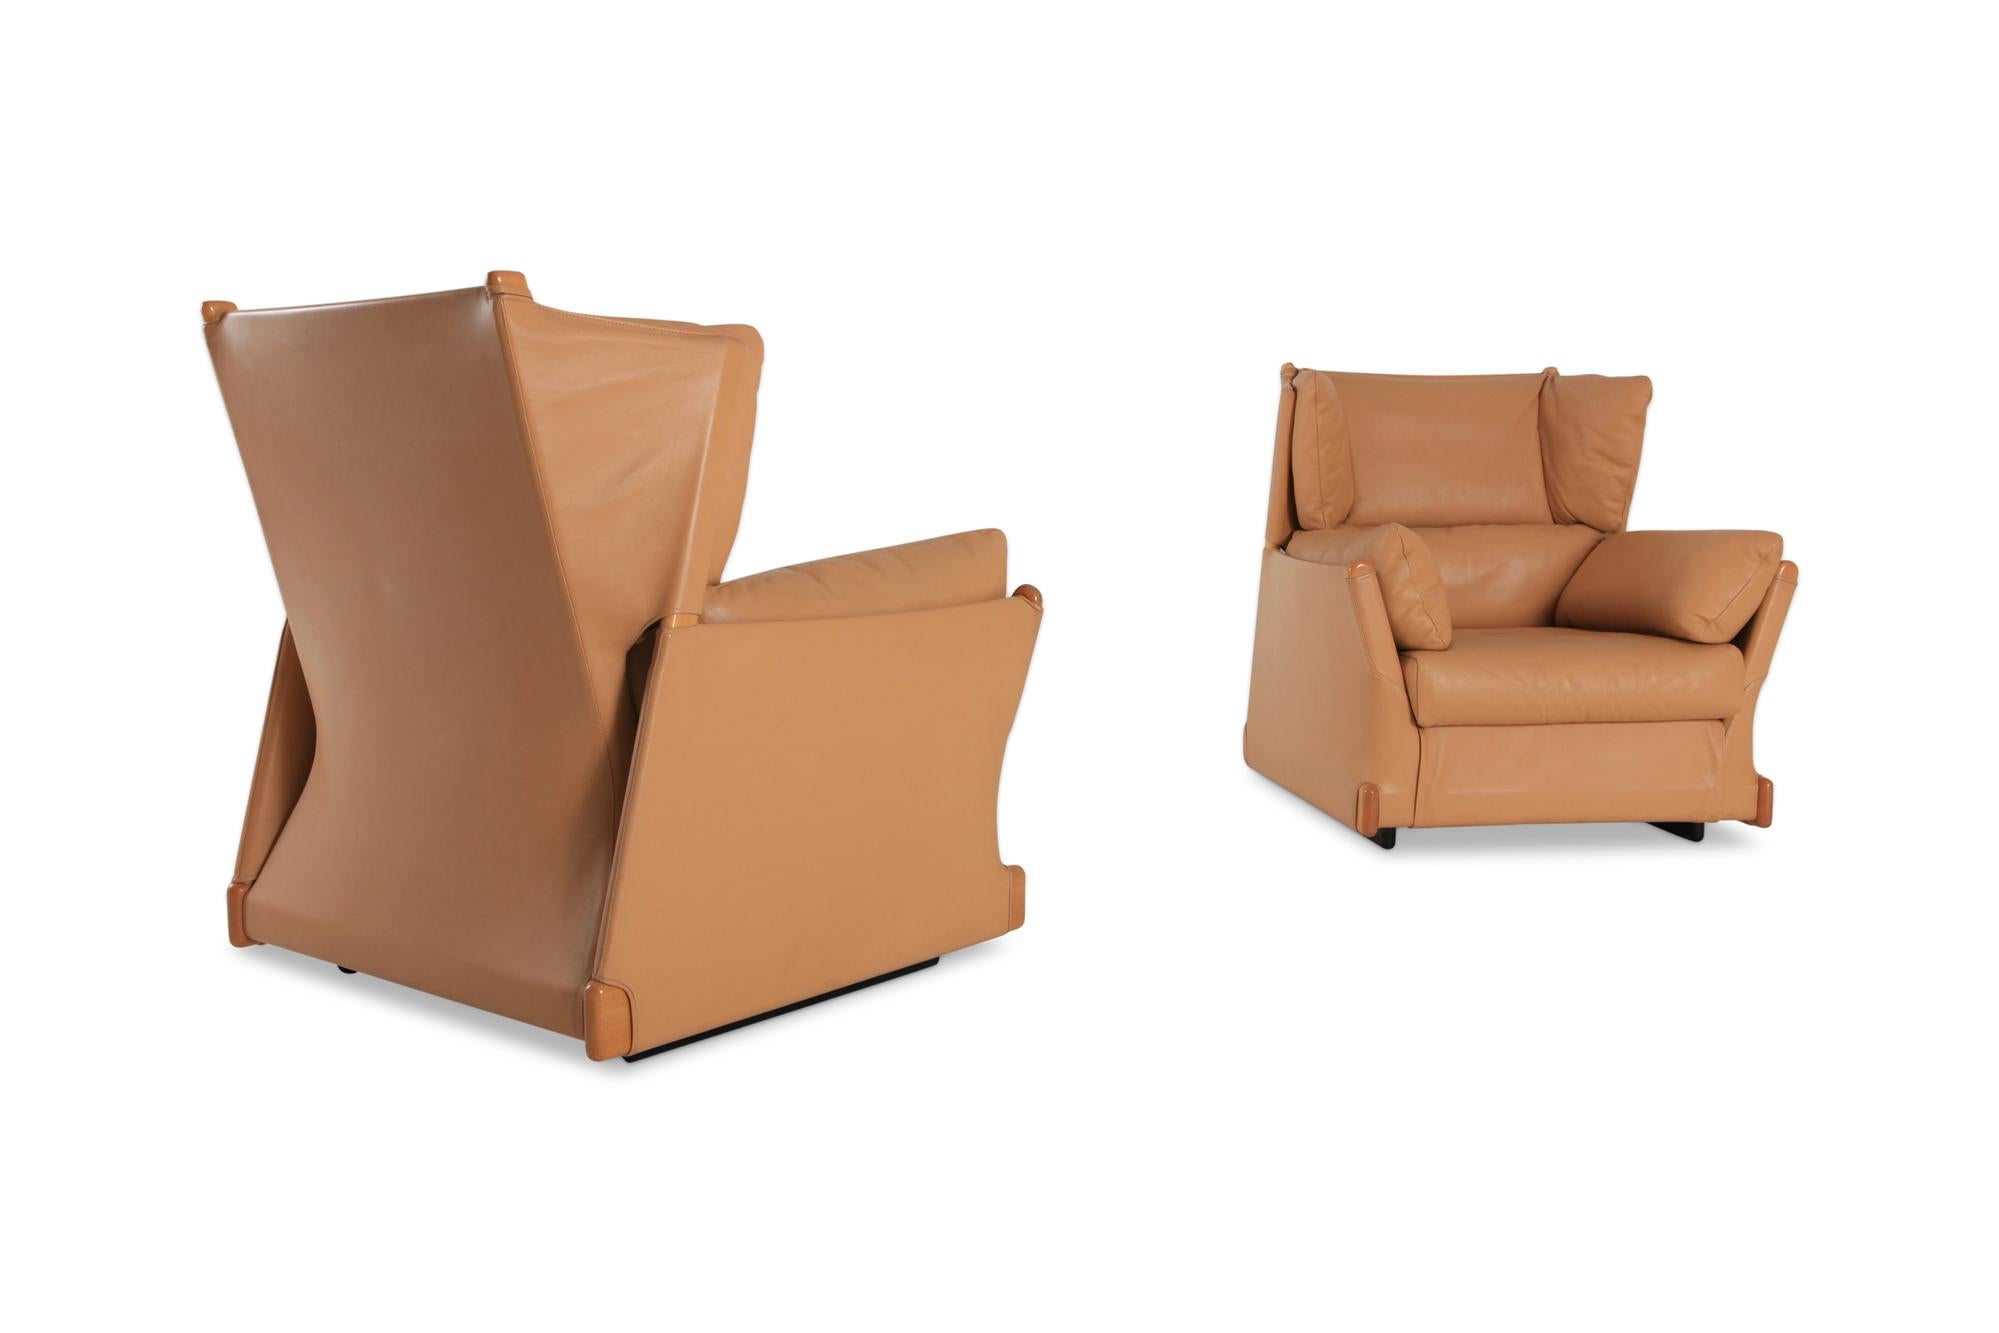 Post-Modern Cassina 'Viola d'amore' Armchairs by Piero Martini